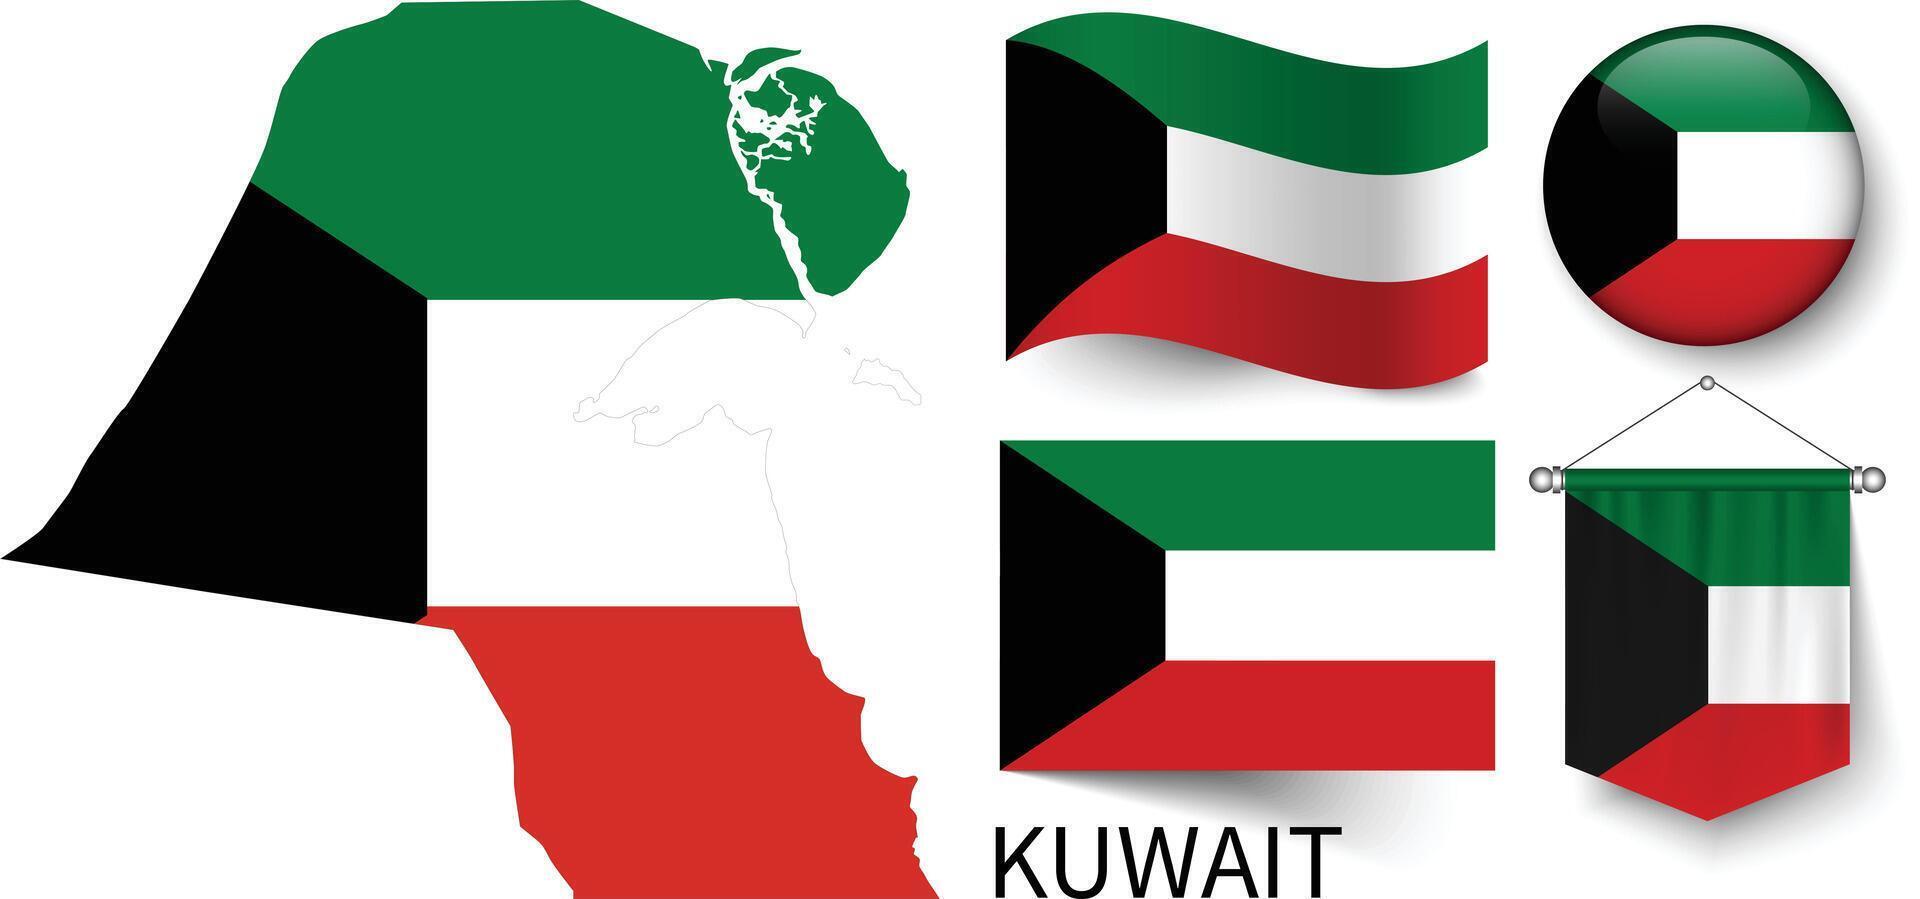 The various patterns of the Kuwait national flags and the map of Kuwait's borders vector